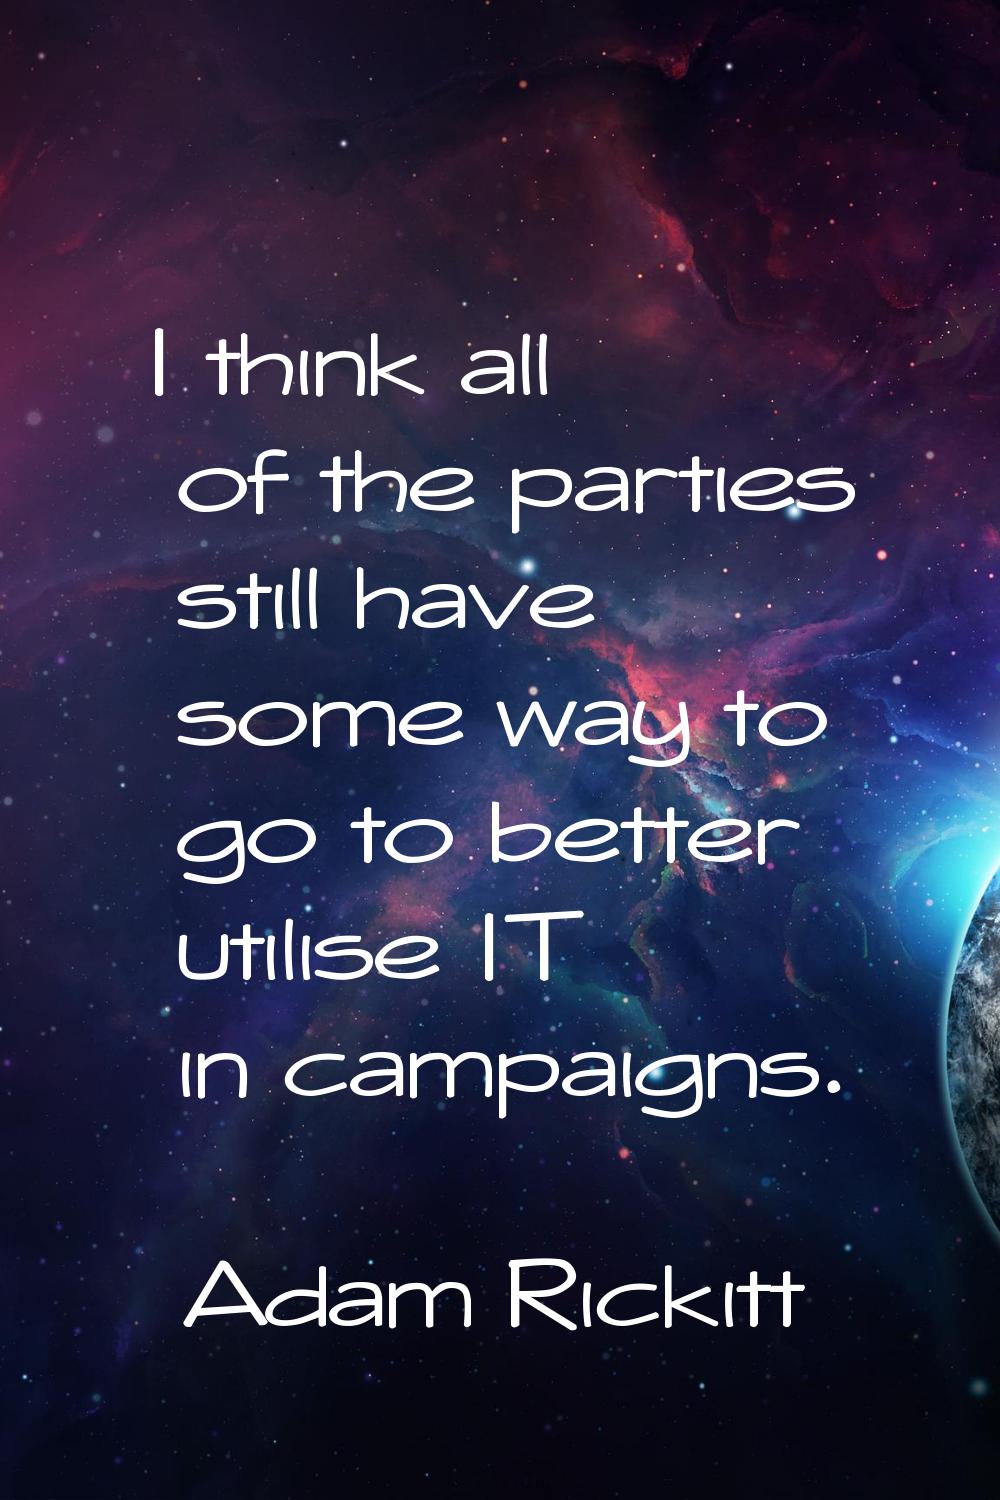 I think all of the parties still have some way to go to better utilise IT in campaigns.